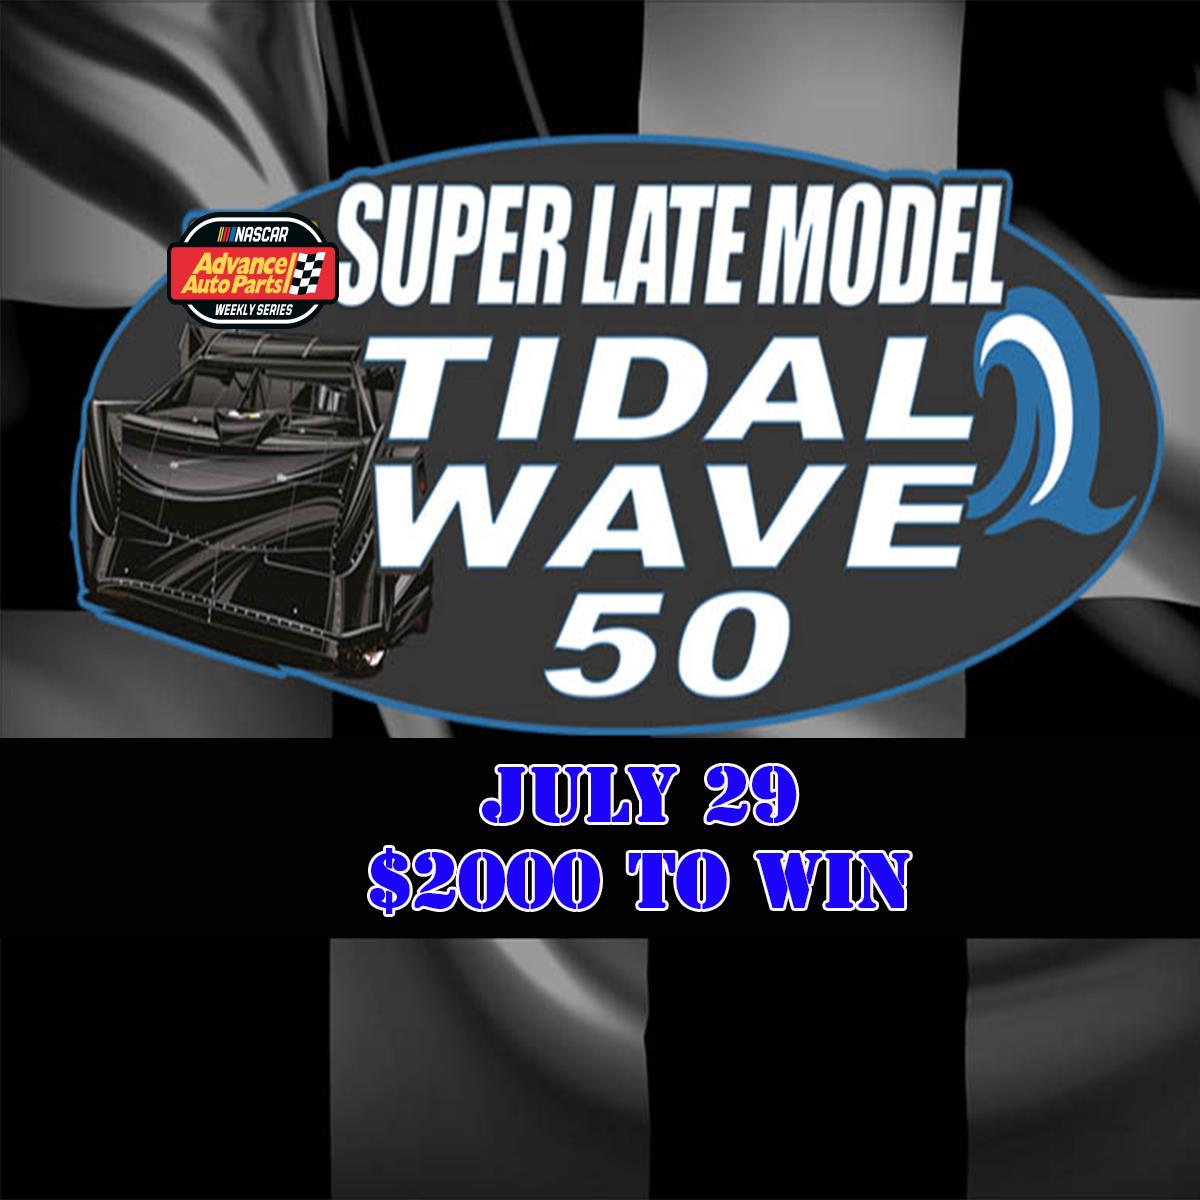 Tidal Wave 50 Up Next $2000 To Win Saturday July 29